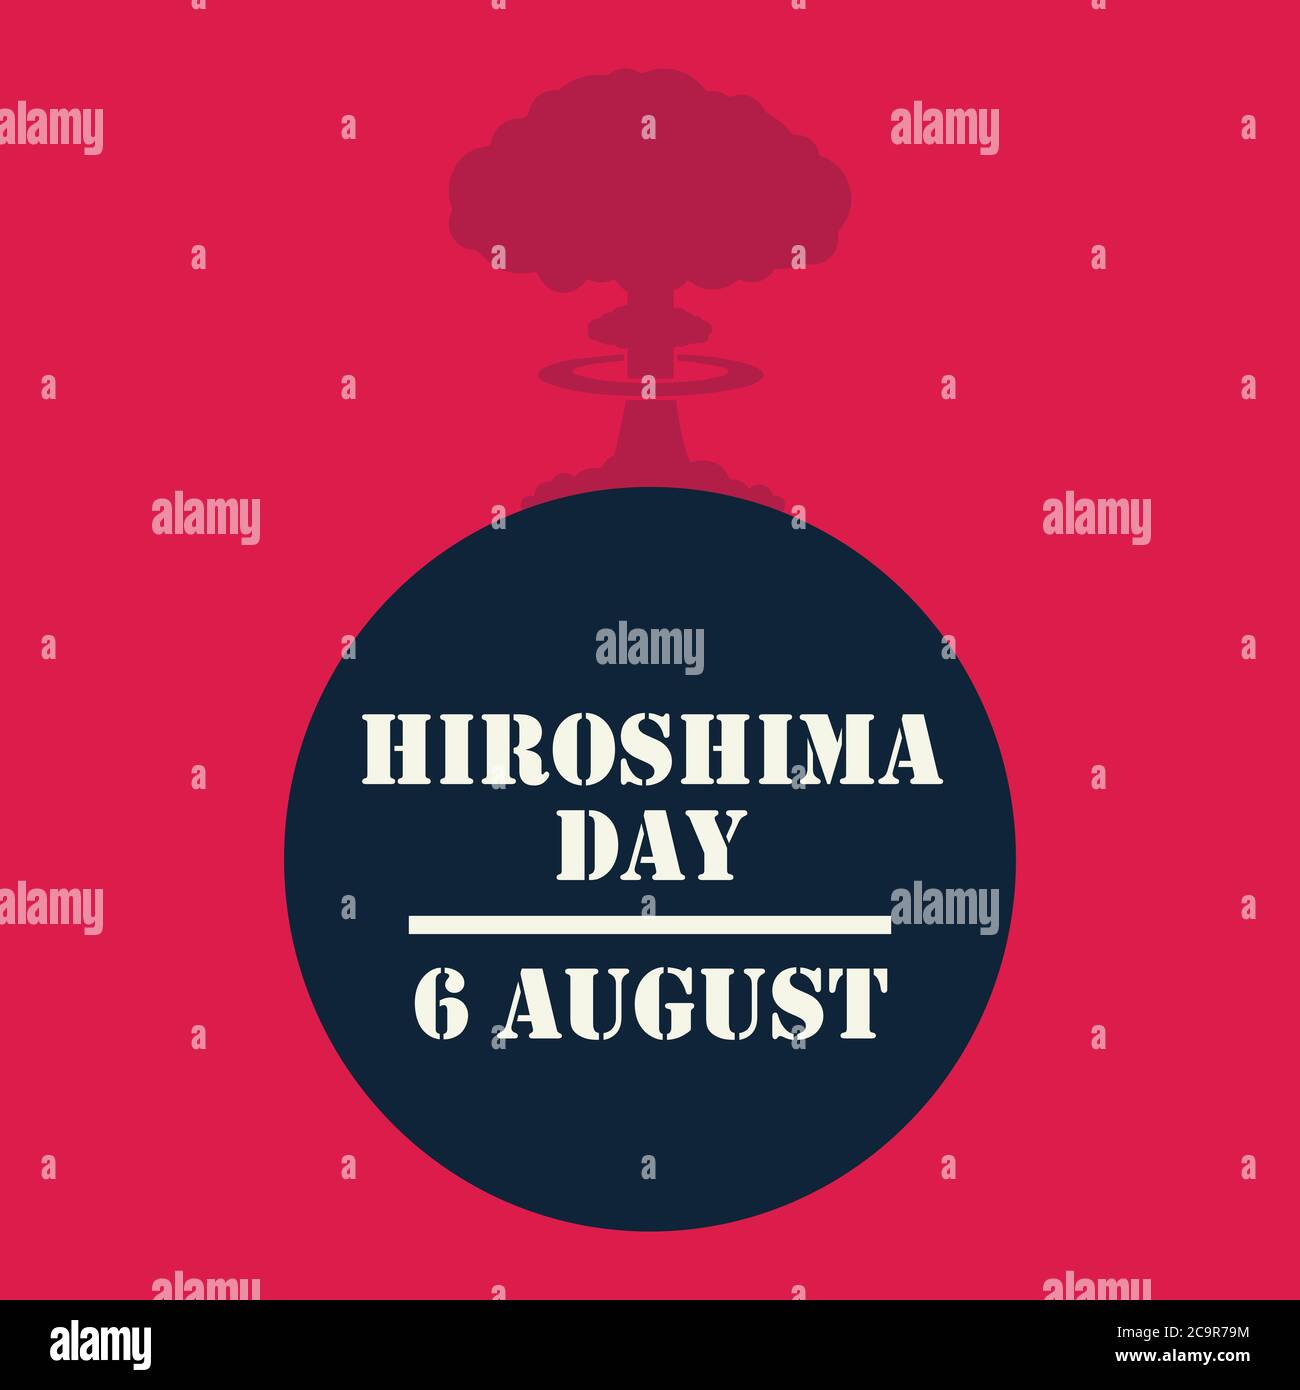 Hiroshima Day, 6 august, nuclear bomb explosion poster, flat illustration, vector Stock Vector